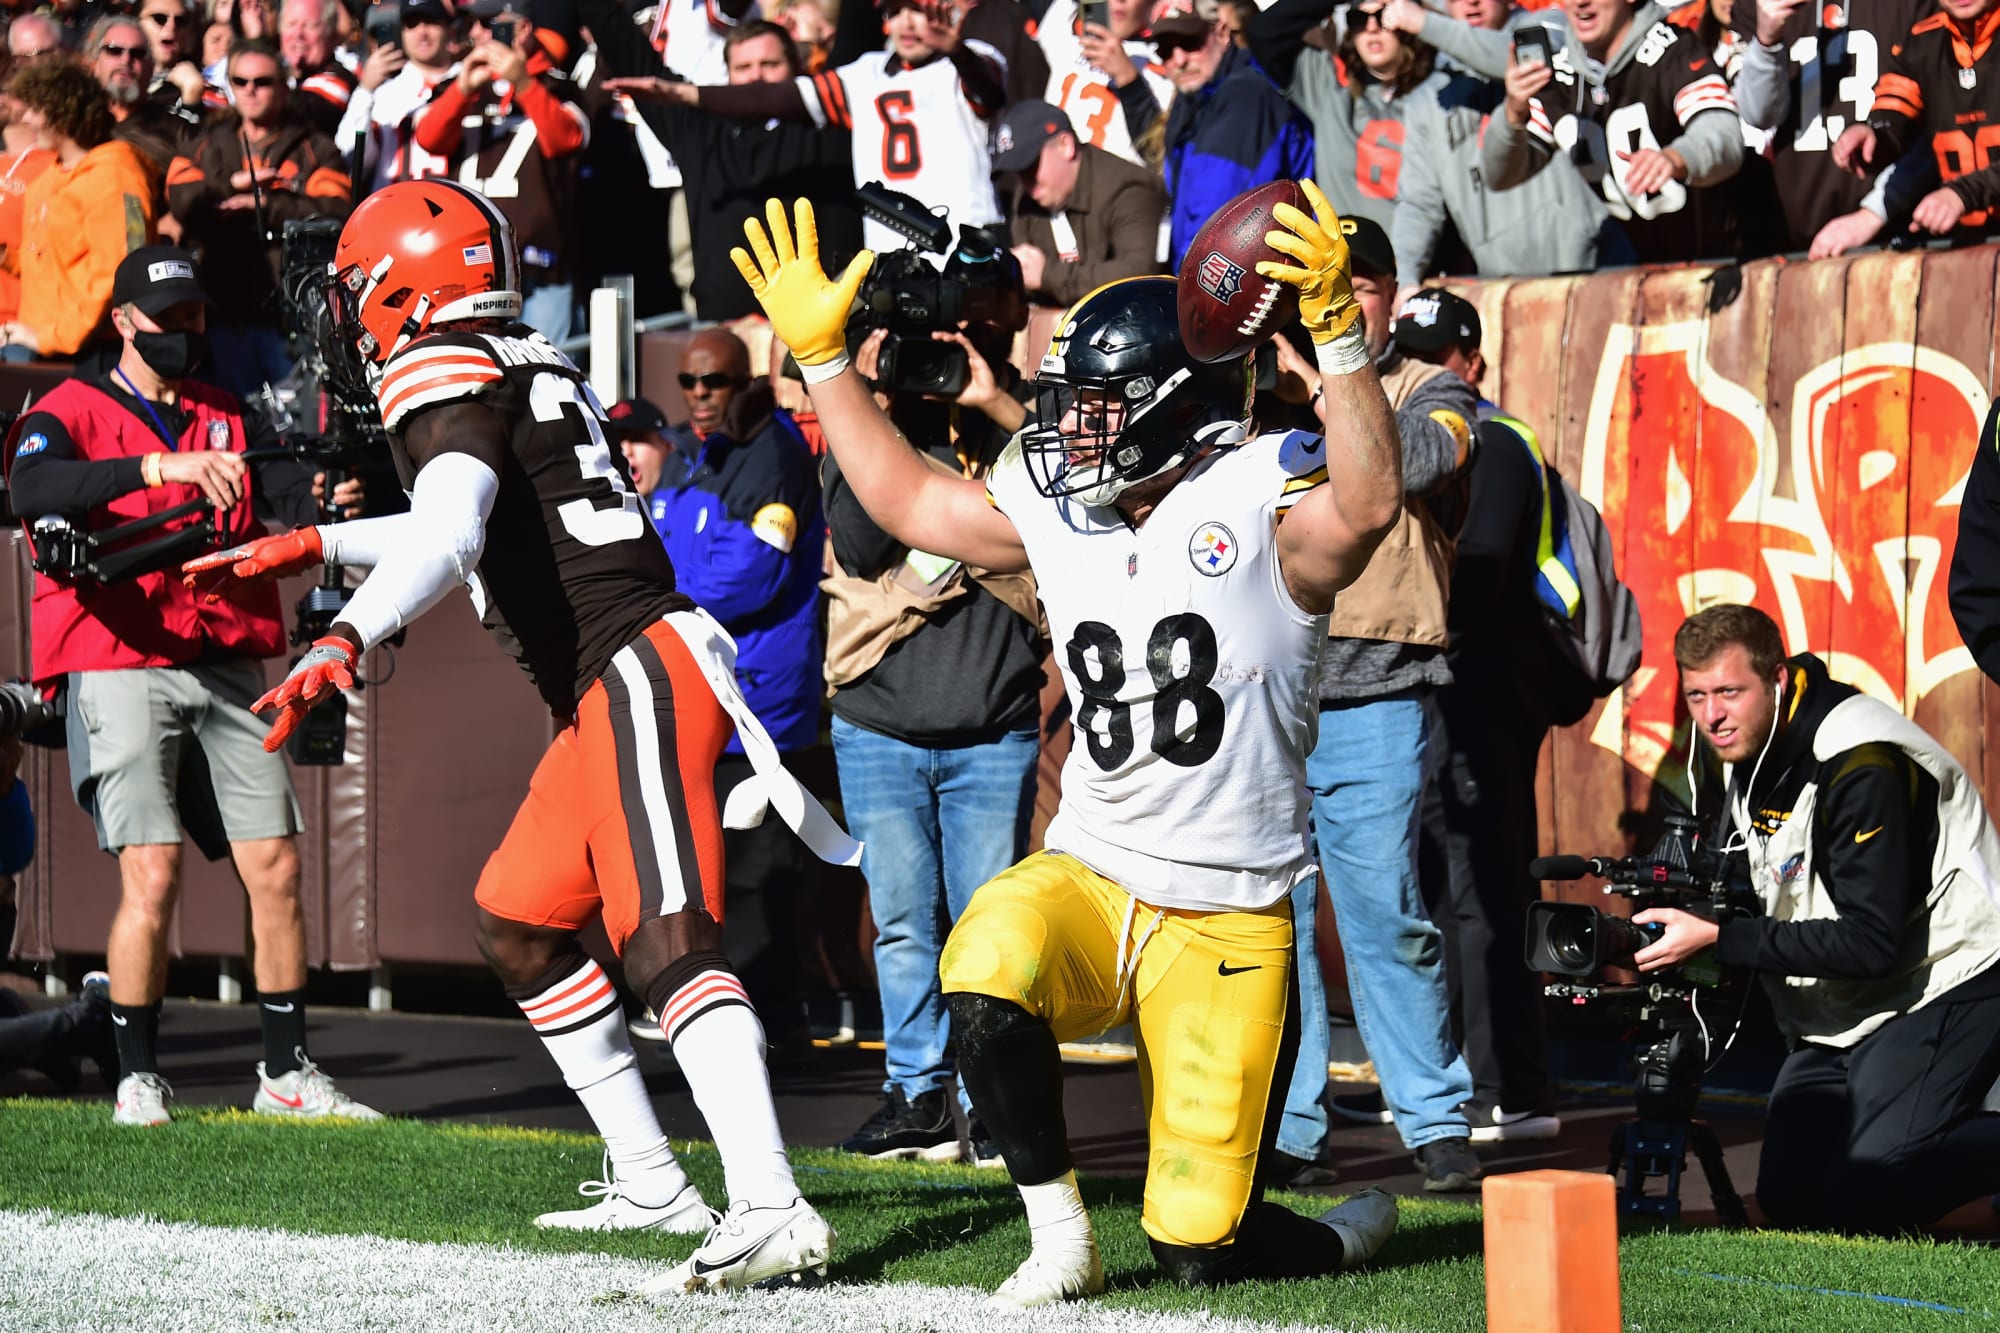 Pat Freiermuth pulls down incredible touchdown for Steelers vs. Browns